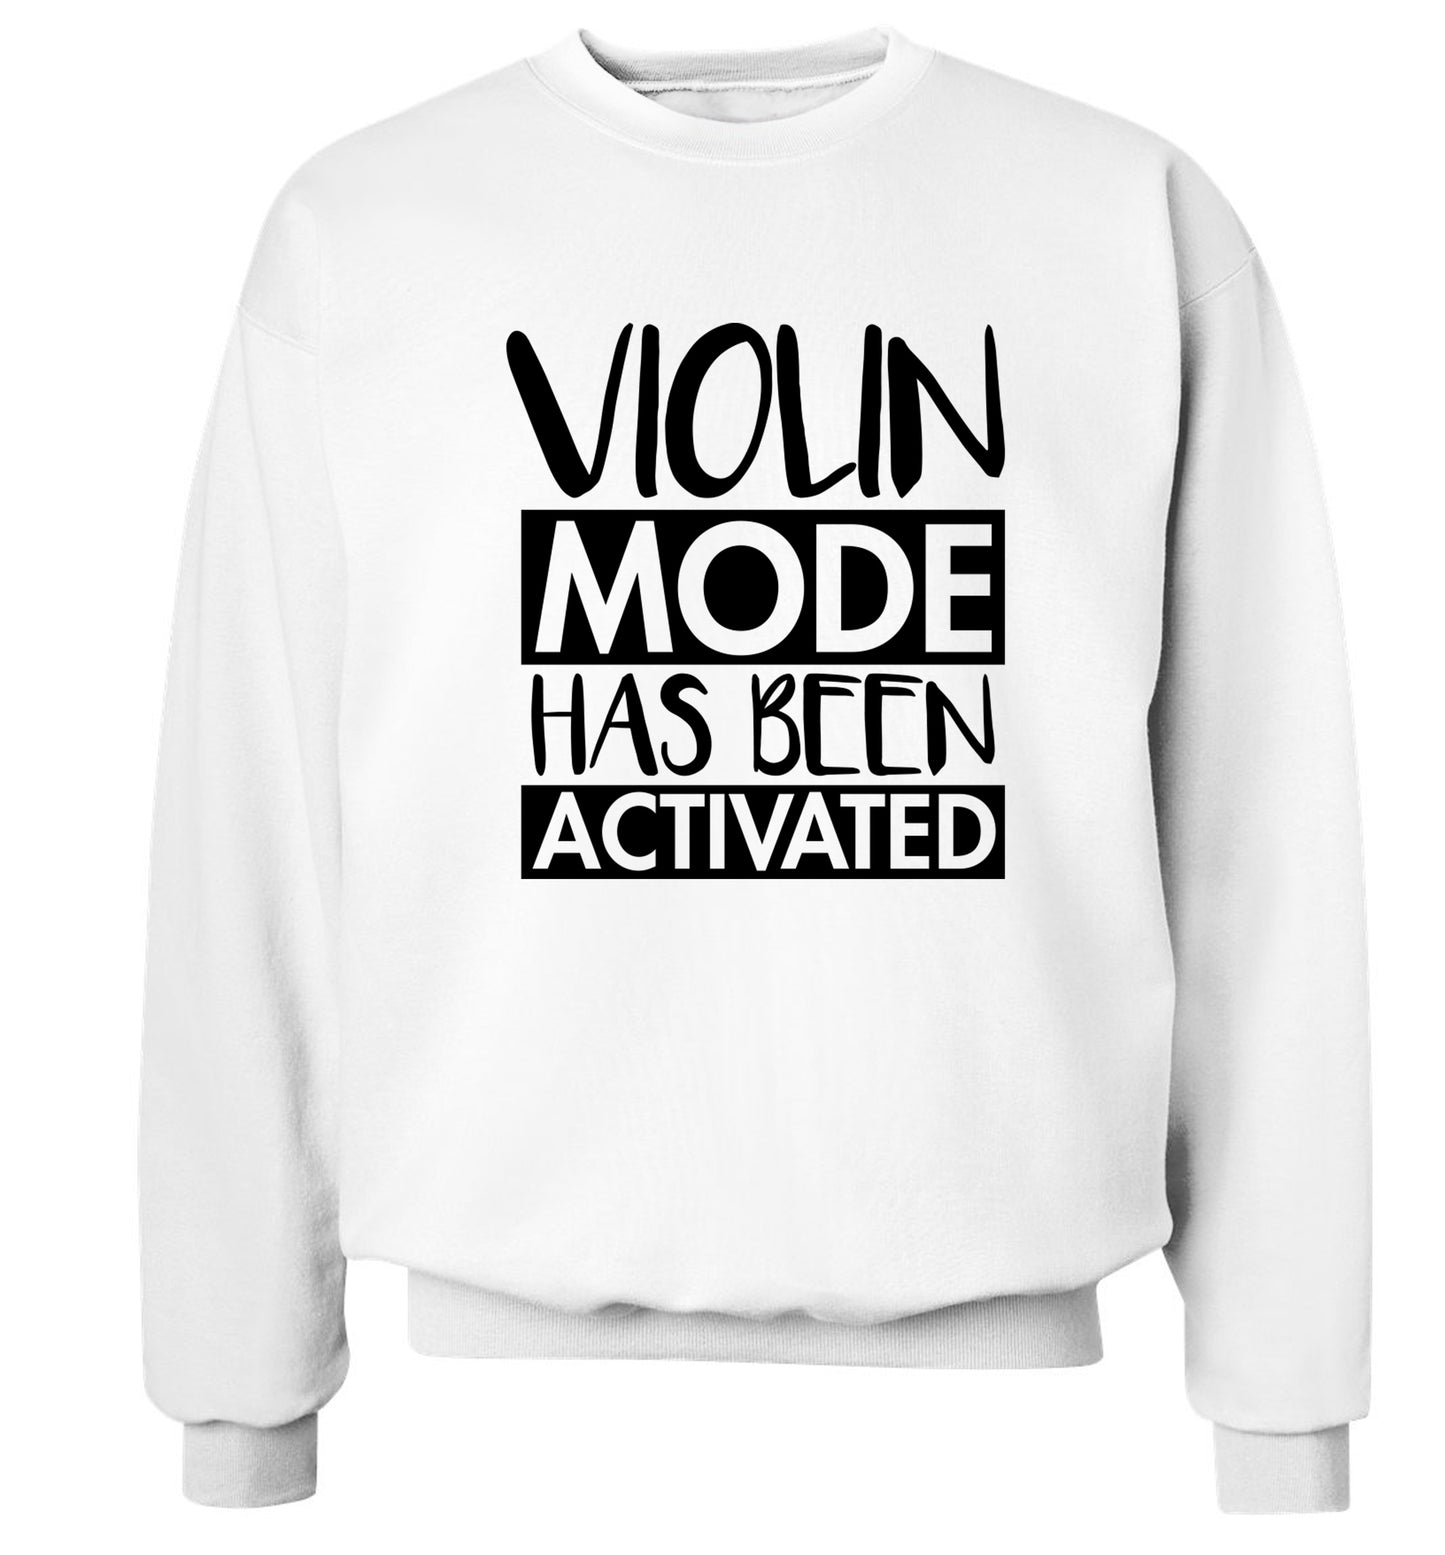 Violin Mode Activated Adult's unisex white Sweater 2XL